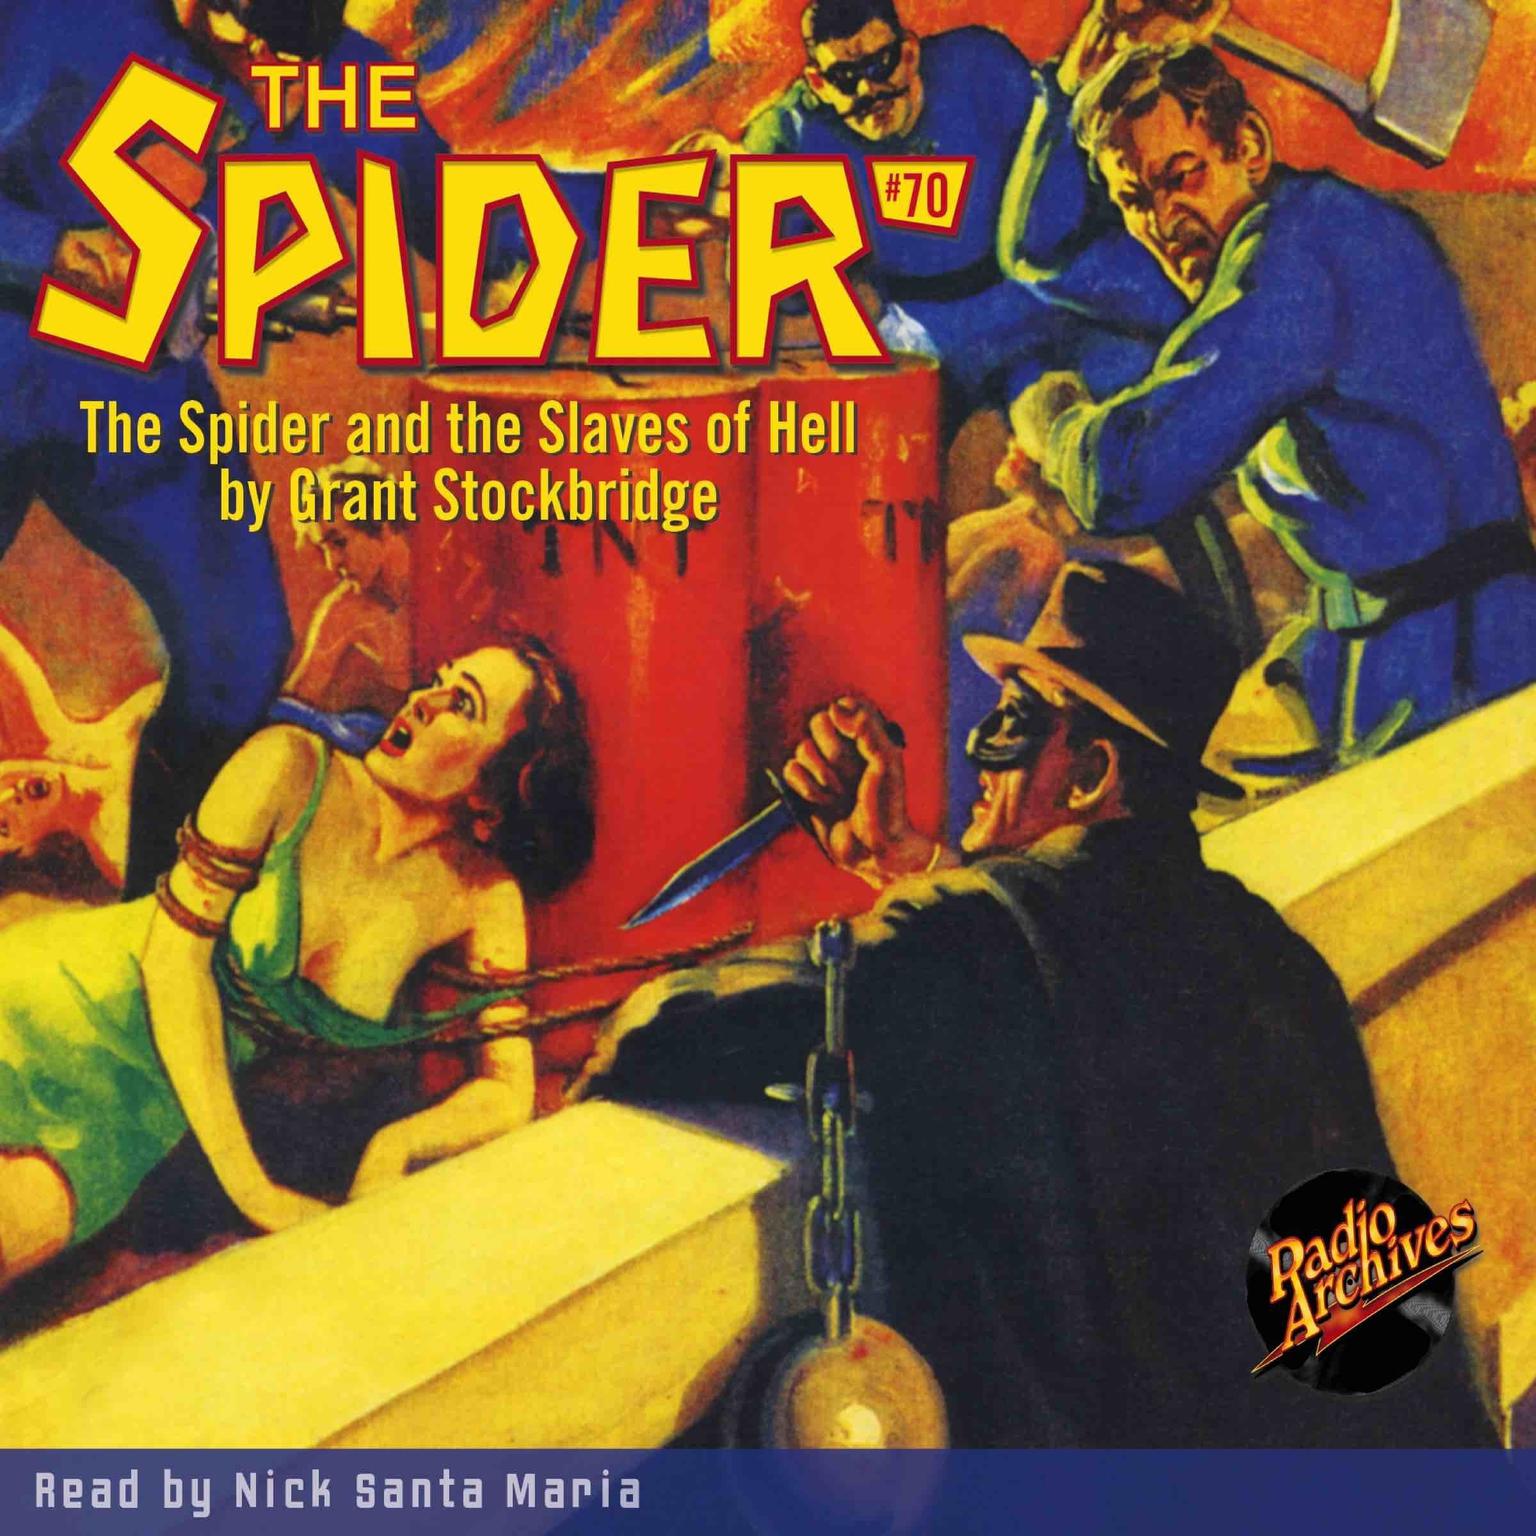 Spider #70, The: The Spider and the Slaves of Hell Audiobook, by Grant Stockbridge